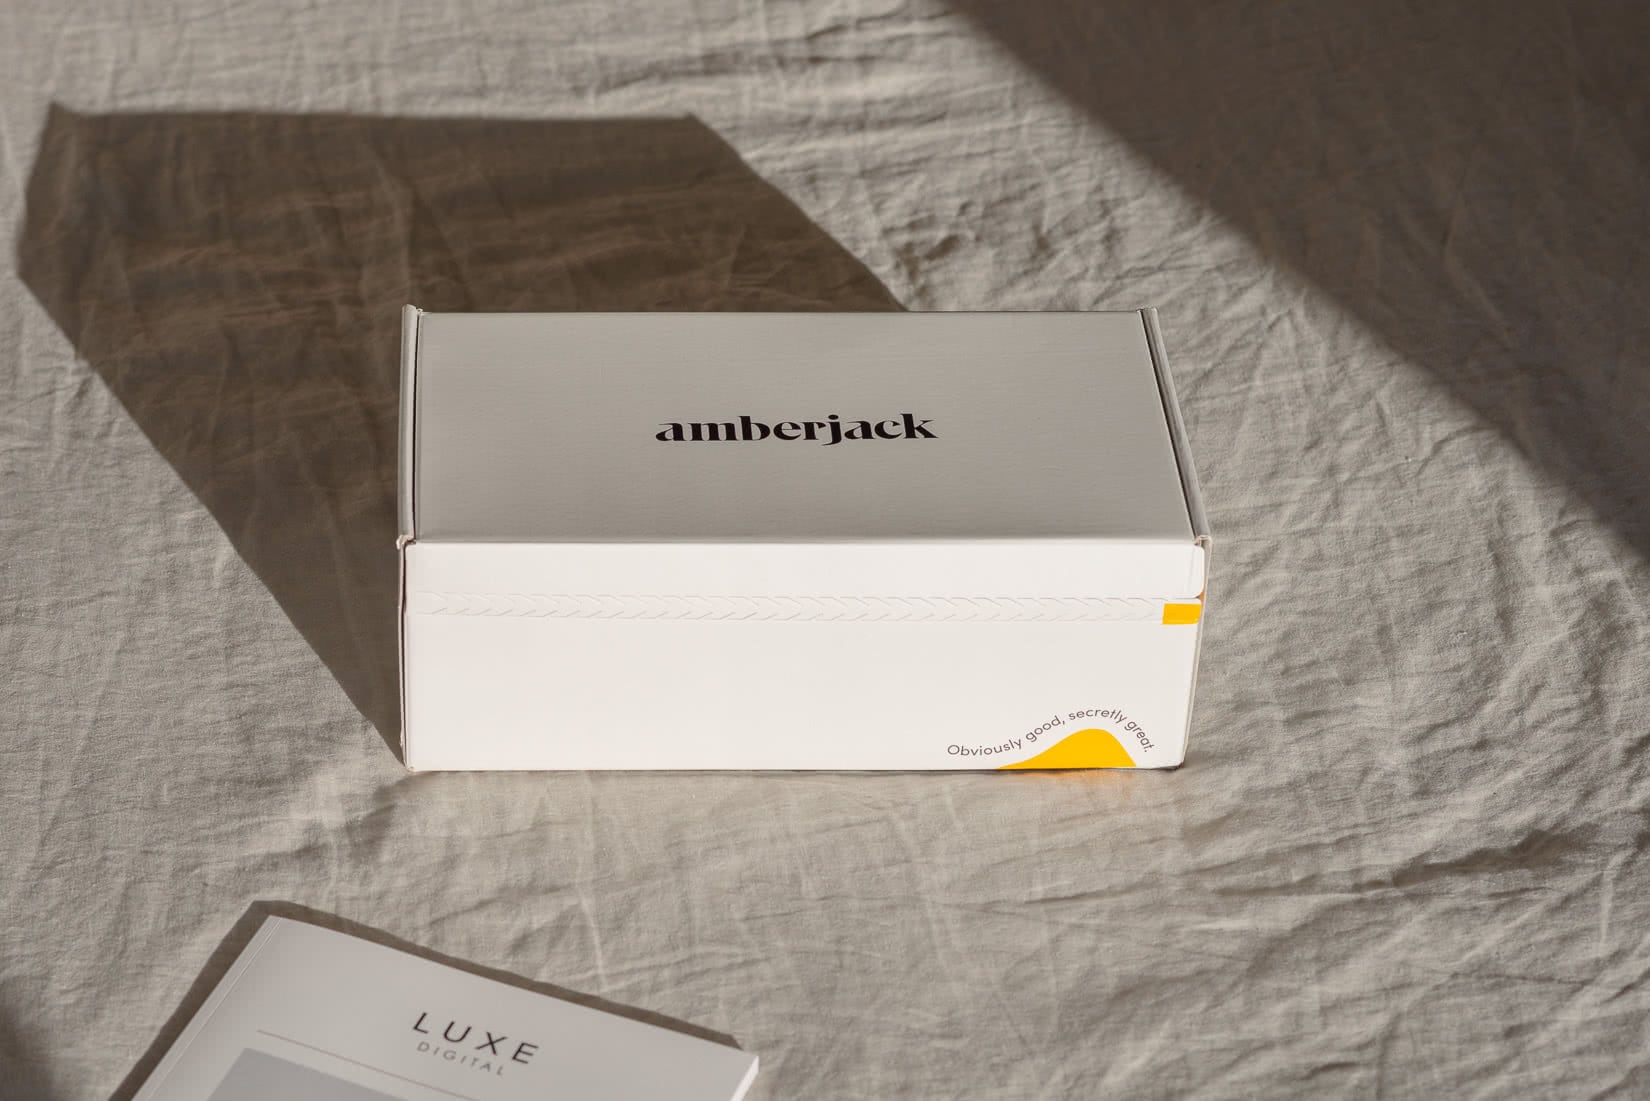 Amberjack shoes review unboxing - Luxe Digital